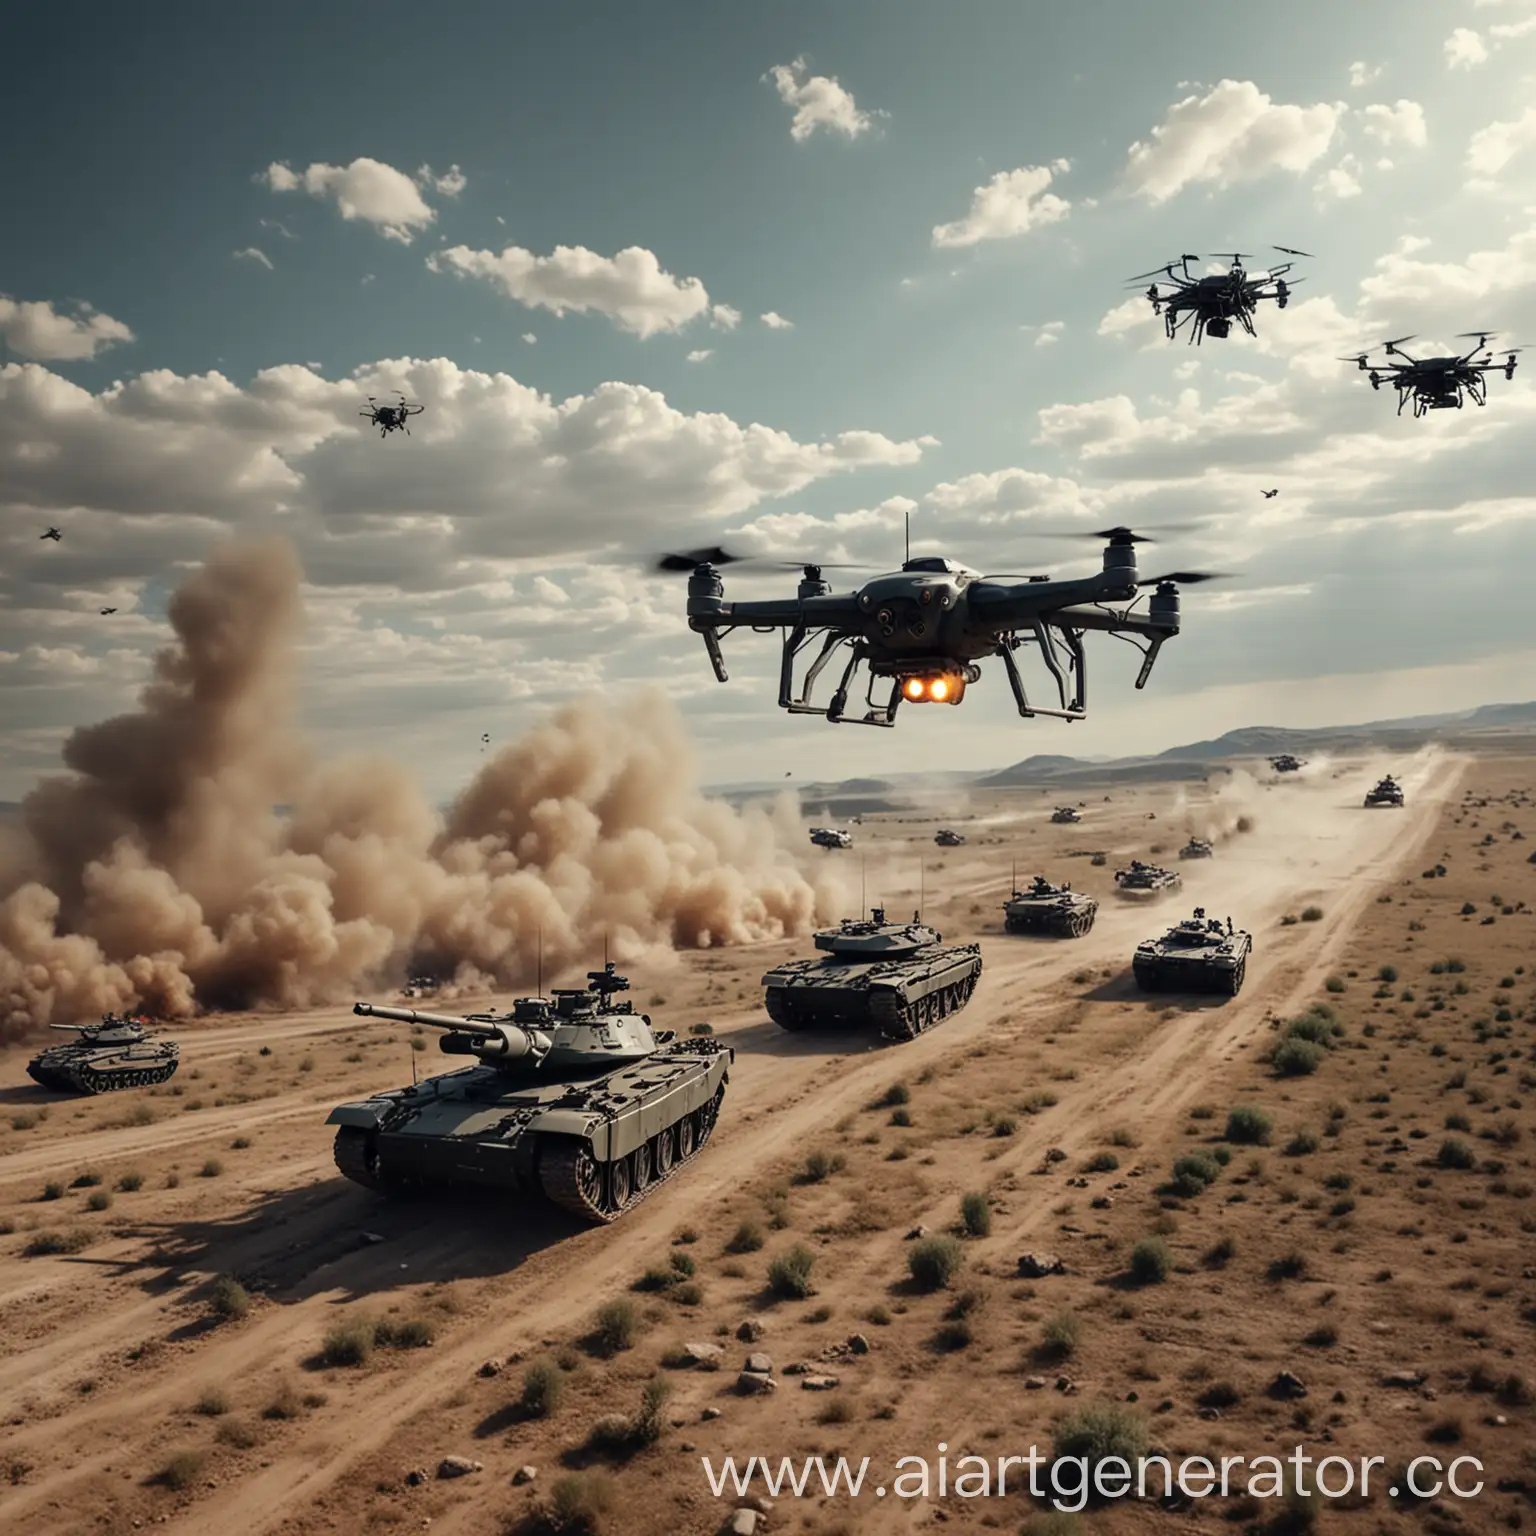 Quadrocopter over battlefield with tanks and military in logo video
